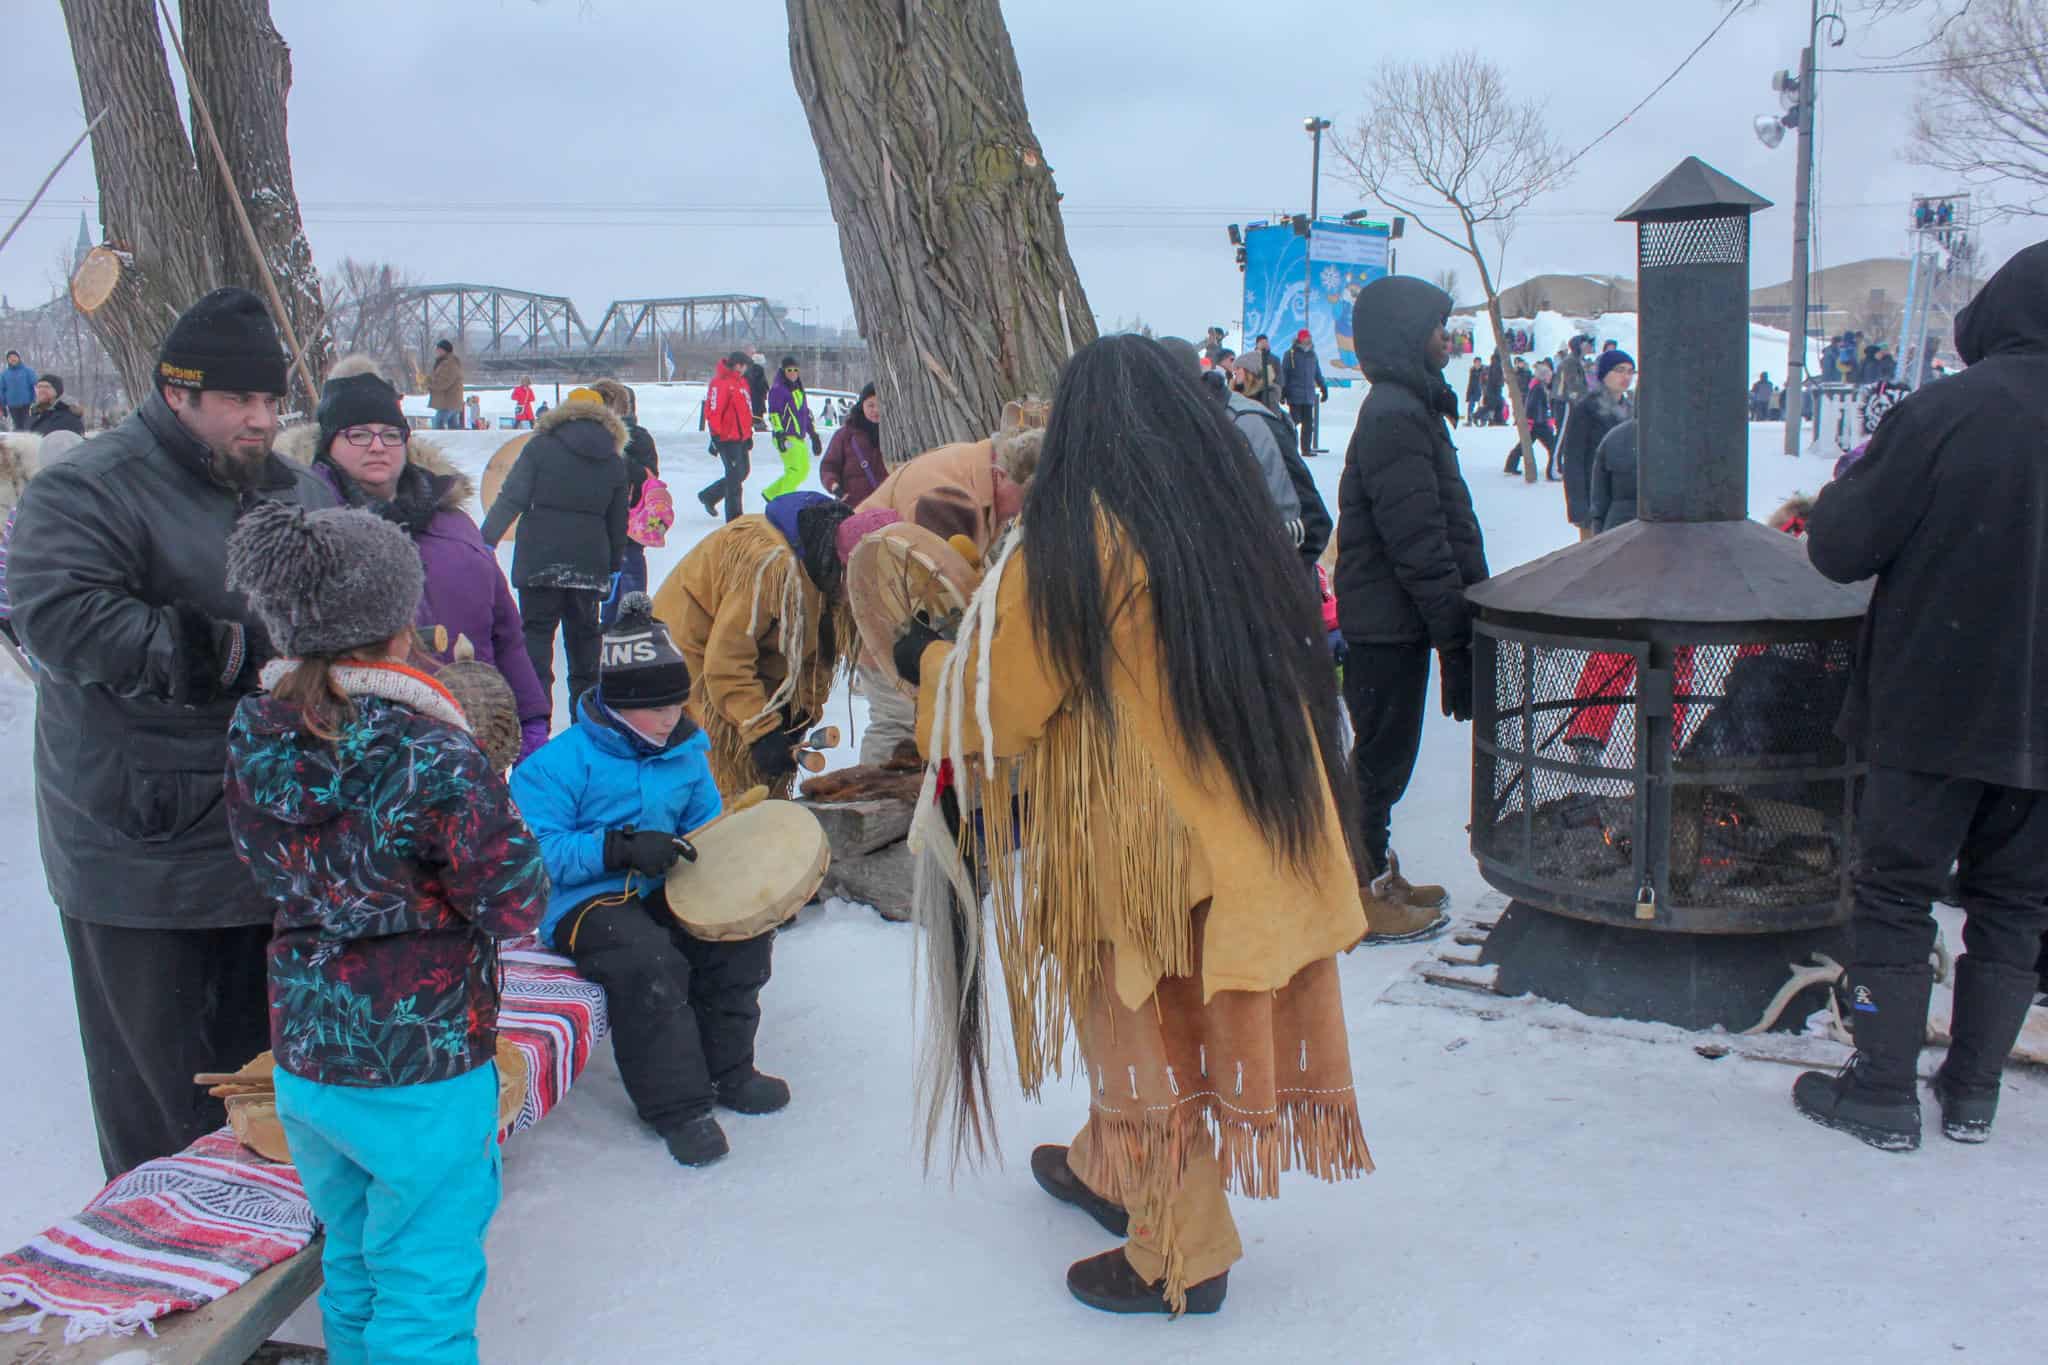 Winterlude is one of the seasonal things to do in Ottawa